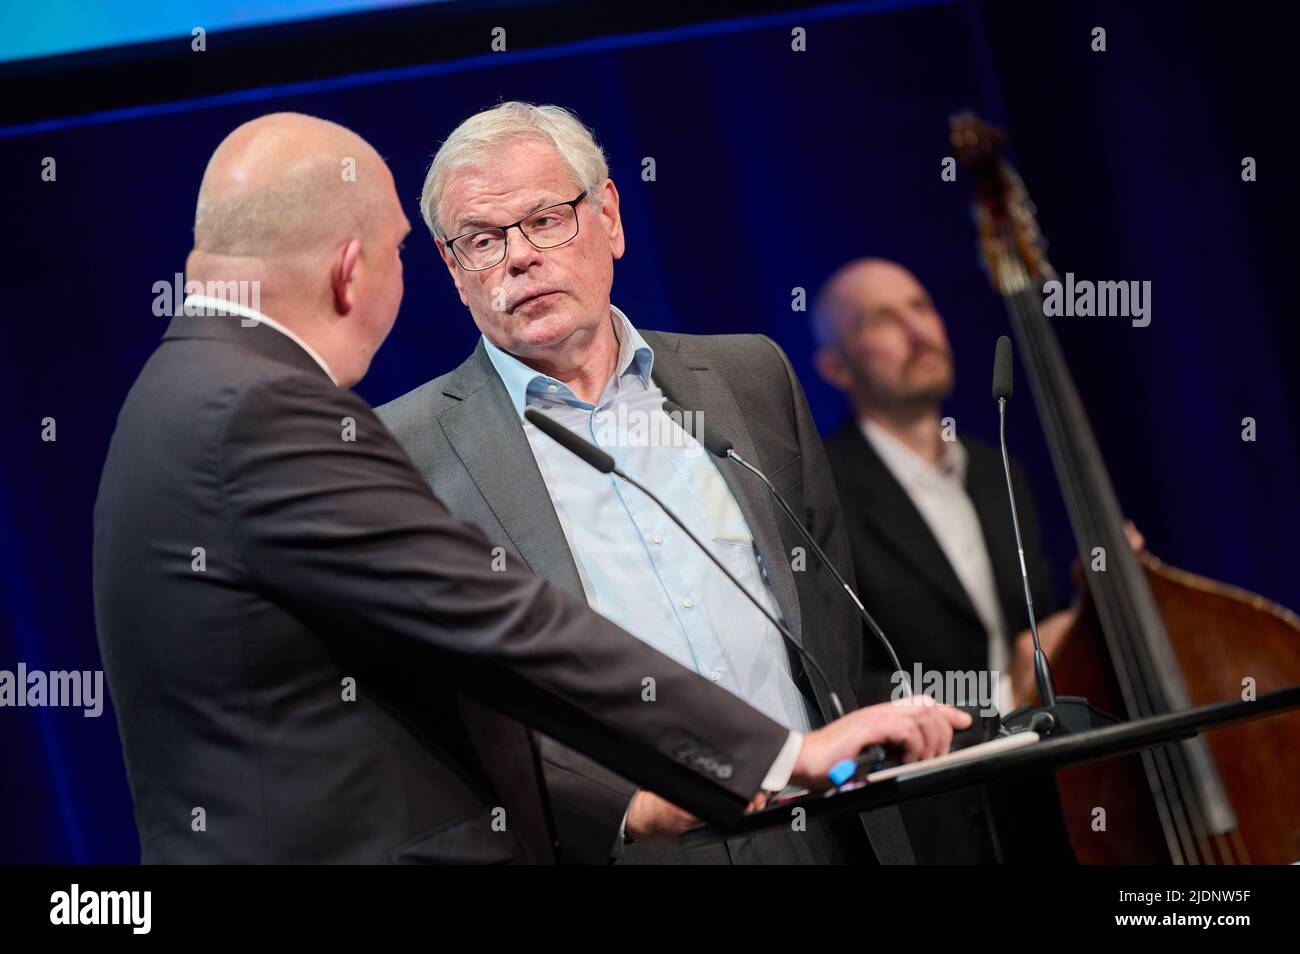 Berlin, Germany. 22nd June, 2022. Helmut Heinen (center), Chairman of the Board of Trustees of the Theodor Wolff Prize, stands on stage with Jörg Thadeusz, moderator, during the Theodor Wolff Prize ceremony at Radialsystem V. The journalism prize awarded by German newspapers commemorates Theodor Wolff, the longtime editor-in-chief of the 'Berliner Tageblatt' newspaper. Credit: Annette Riedl/dpa/Alamy Live News Stock Photo